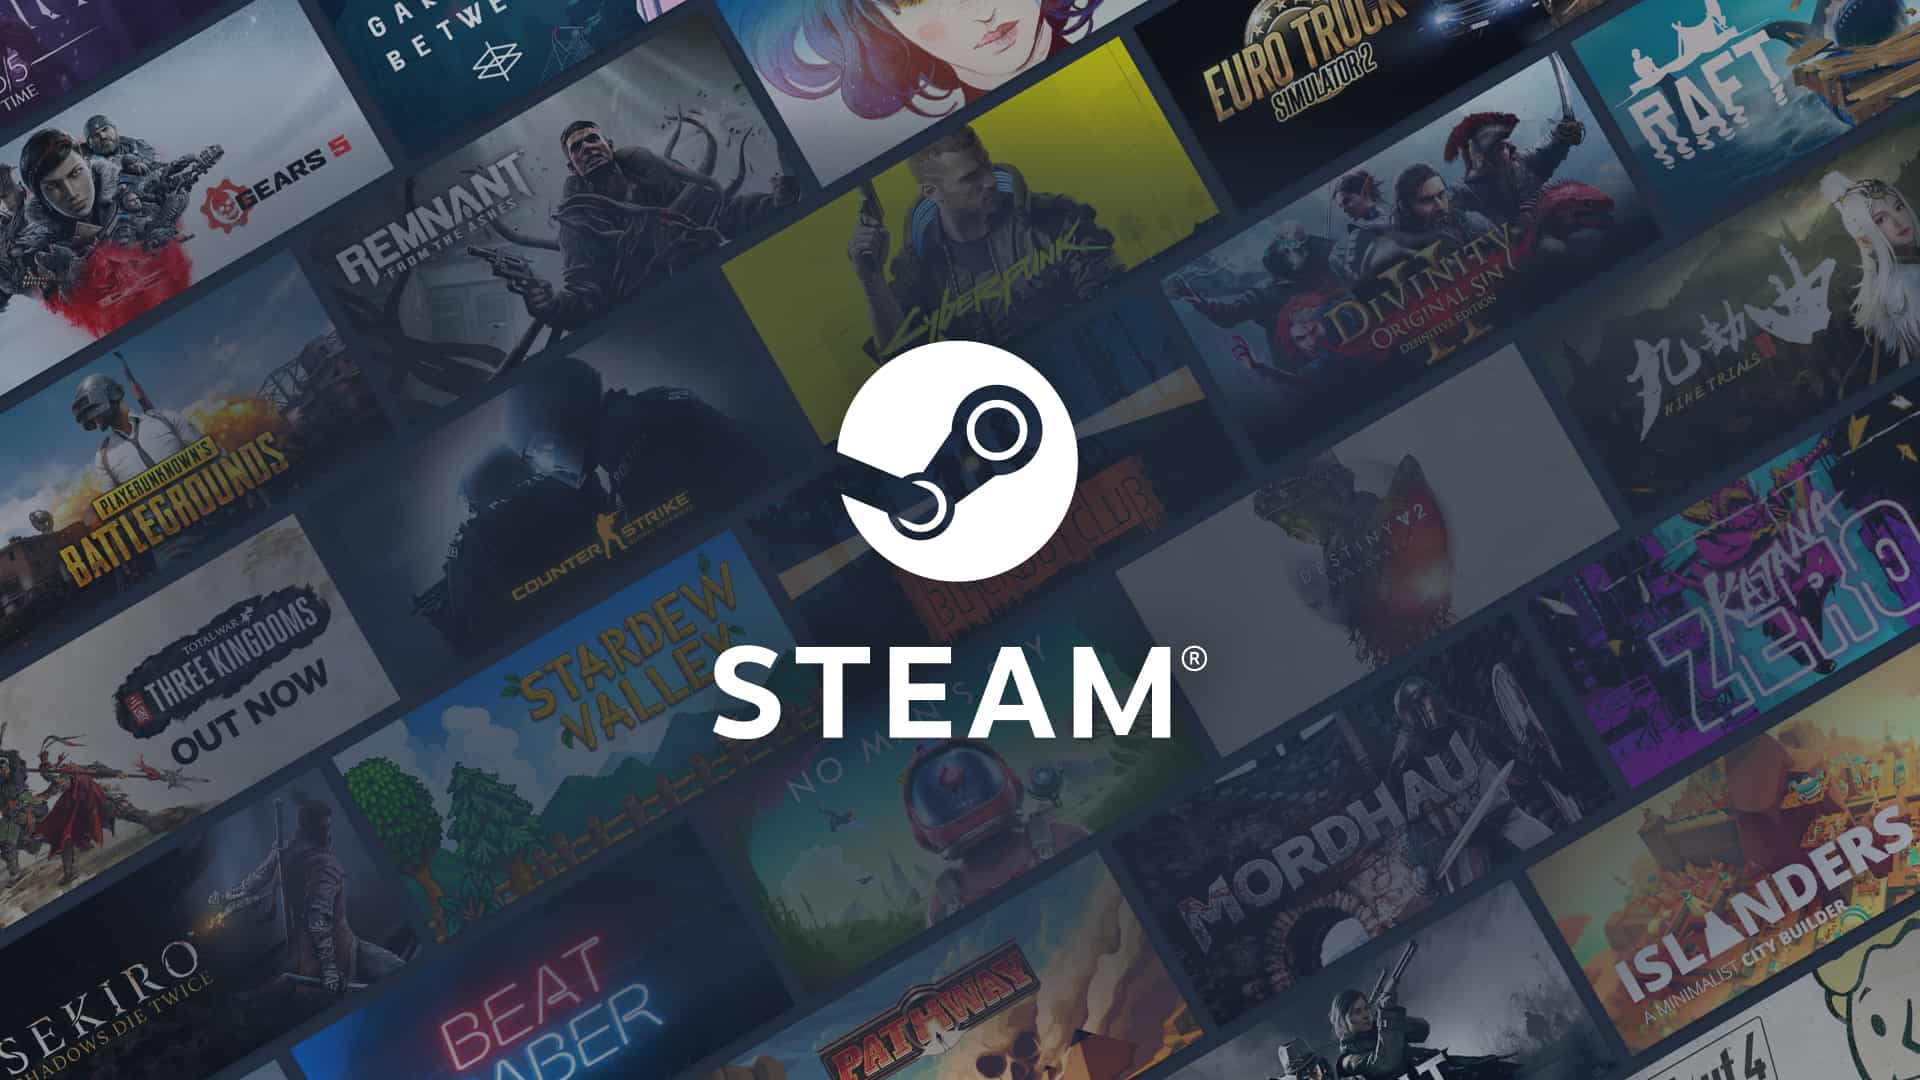 Steam home image.